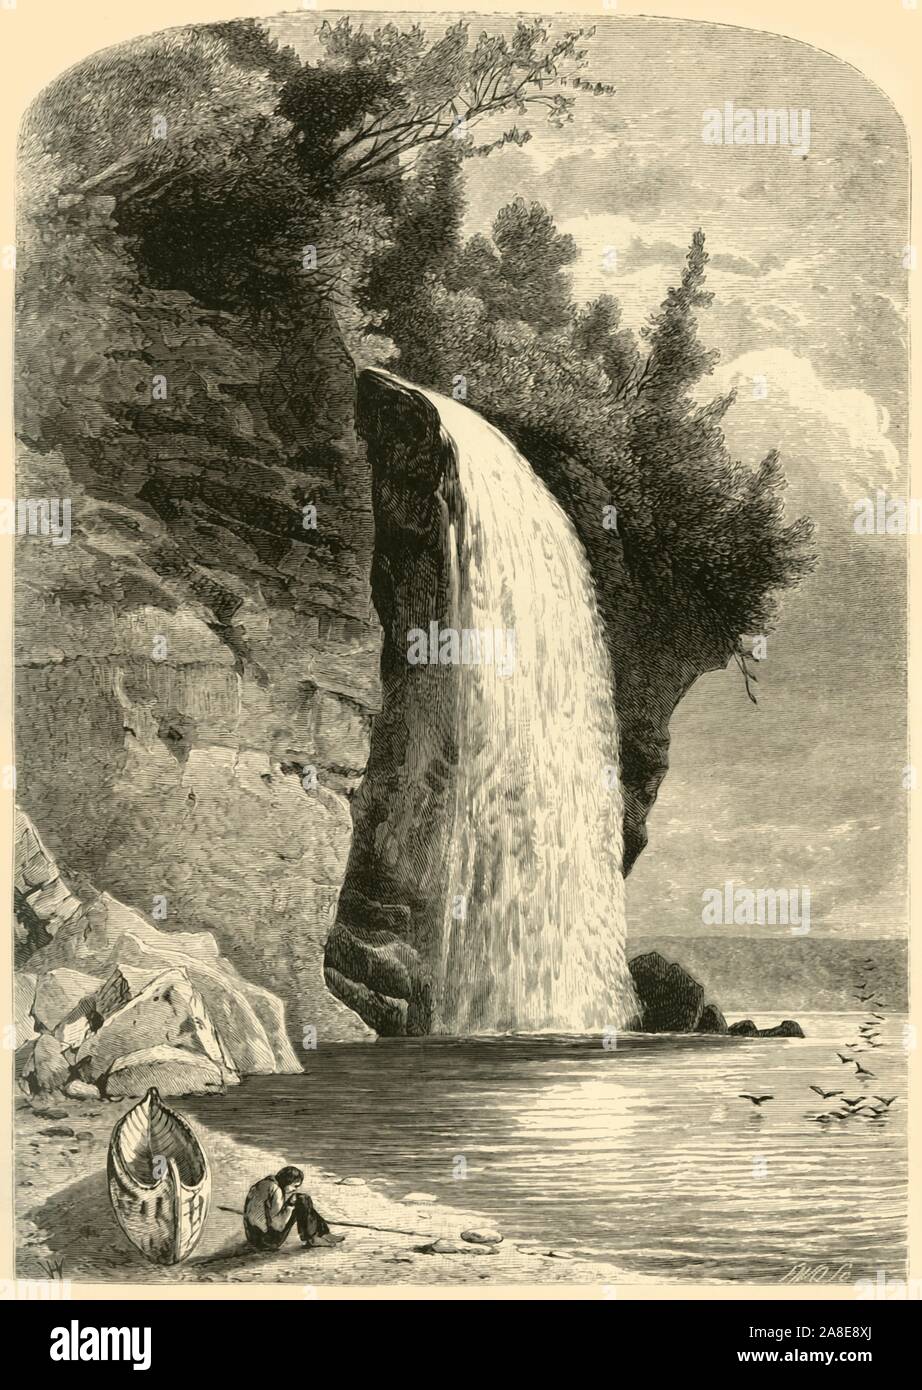 'Silver Cascade', 1872. Waterfall on Lake Superior, Minnesota, USA. 'The Silver Cascade falls from an overhanging cliff, one hundred and seventy-five feet, into the lake below. The fall of Niagara is one hundred and sixty-five feet, ten feet less than the Silver, which, however, is but a ribbon in breadth, compared to the &quot;Thunder of Waters&quot;. The Silver is a beautiful fall, and the largest among the Pictures [Pictured Rocks]; but the whole coast of Superior is spangled with the spray of innumerable cascades and rapids, as all the little rivers, instead of running through the gorges a Stock Photo